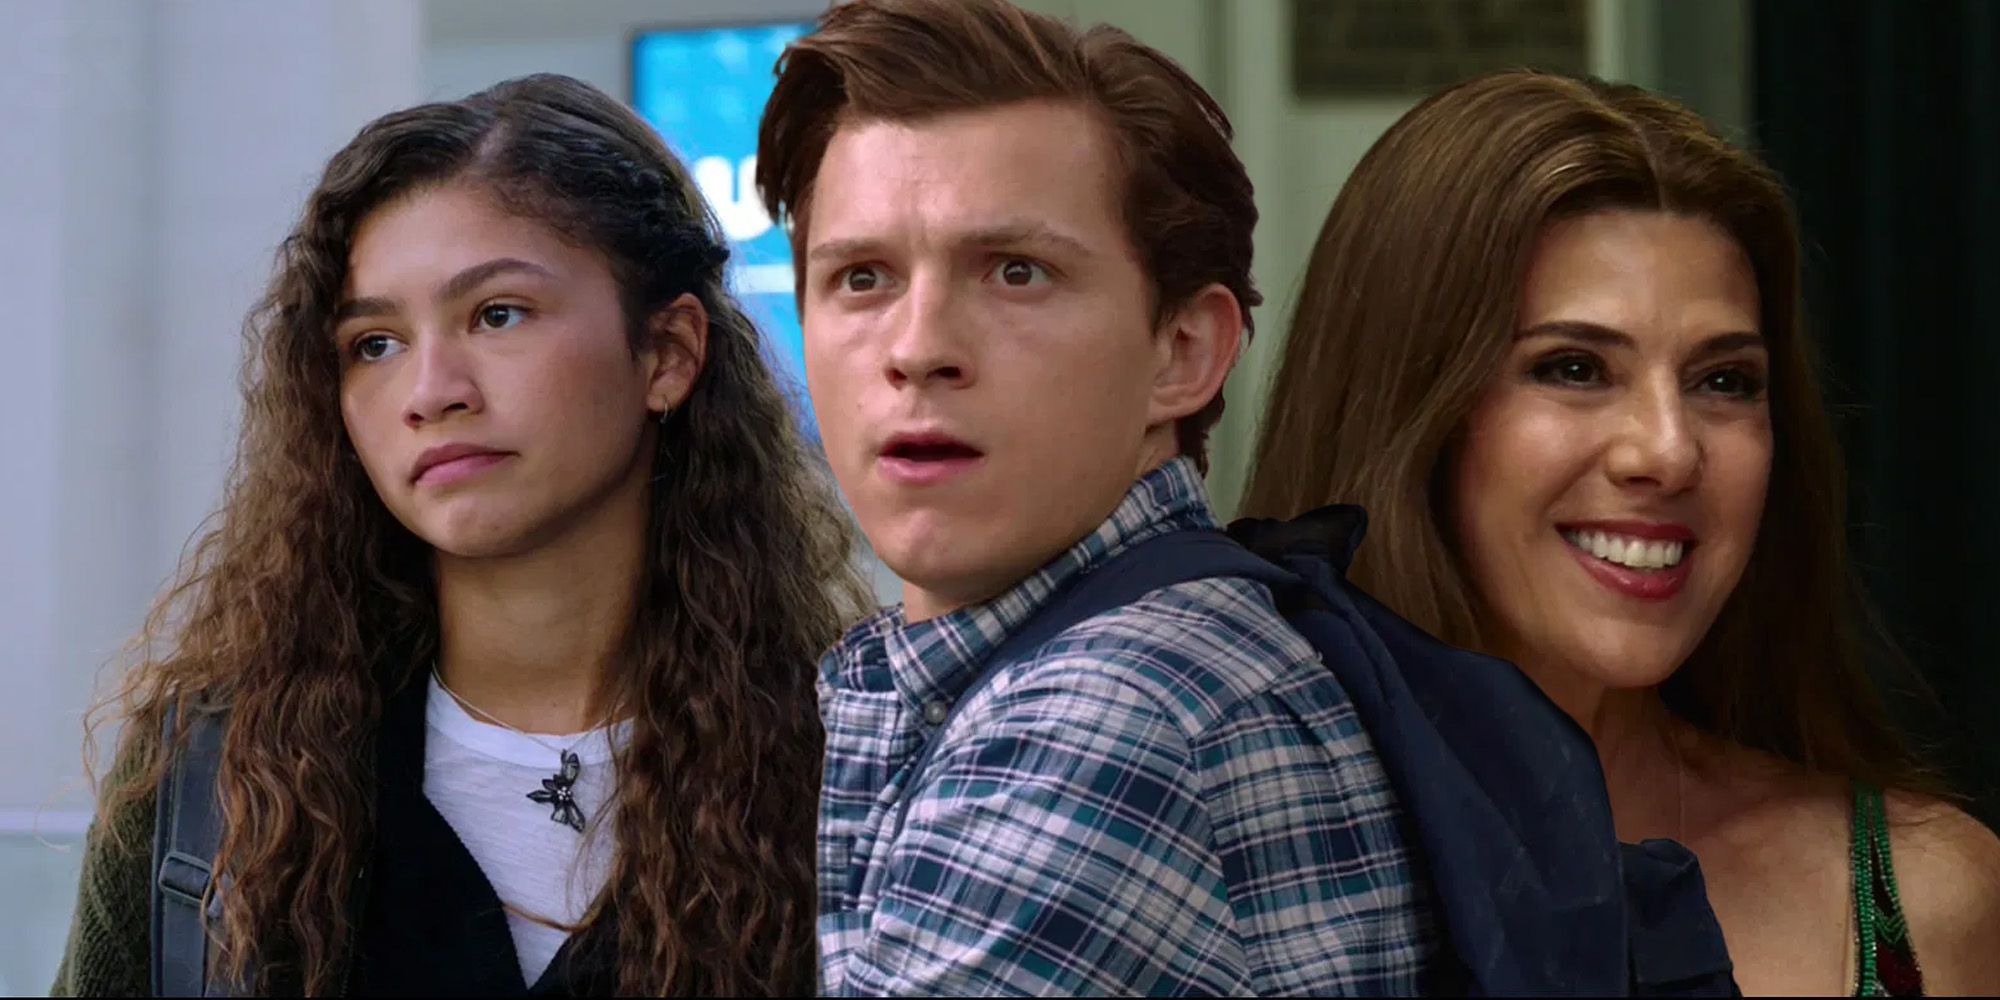 MJ, Peter, and Aunt May in the MCU's Spider-Man movies